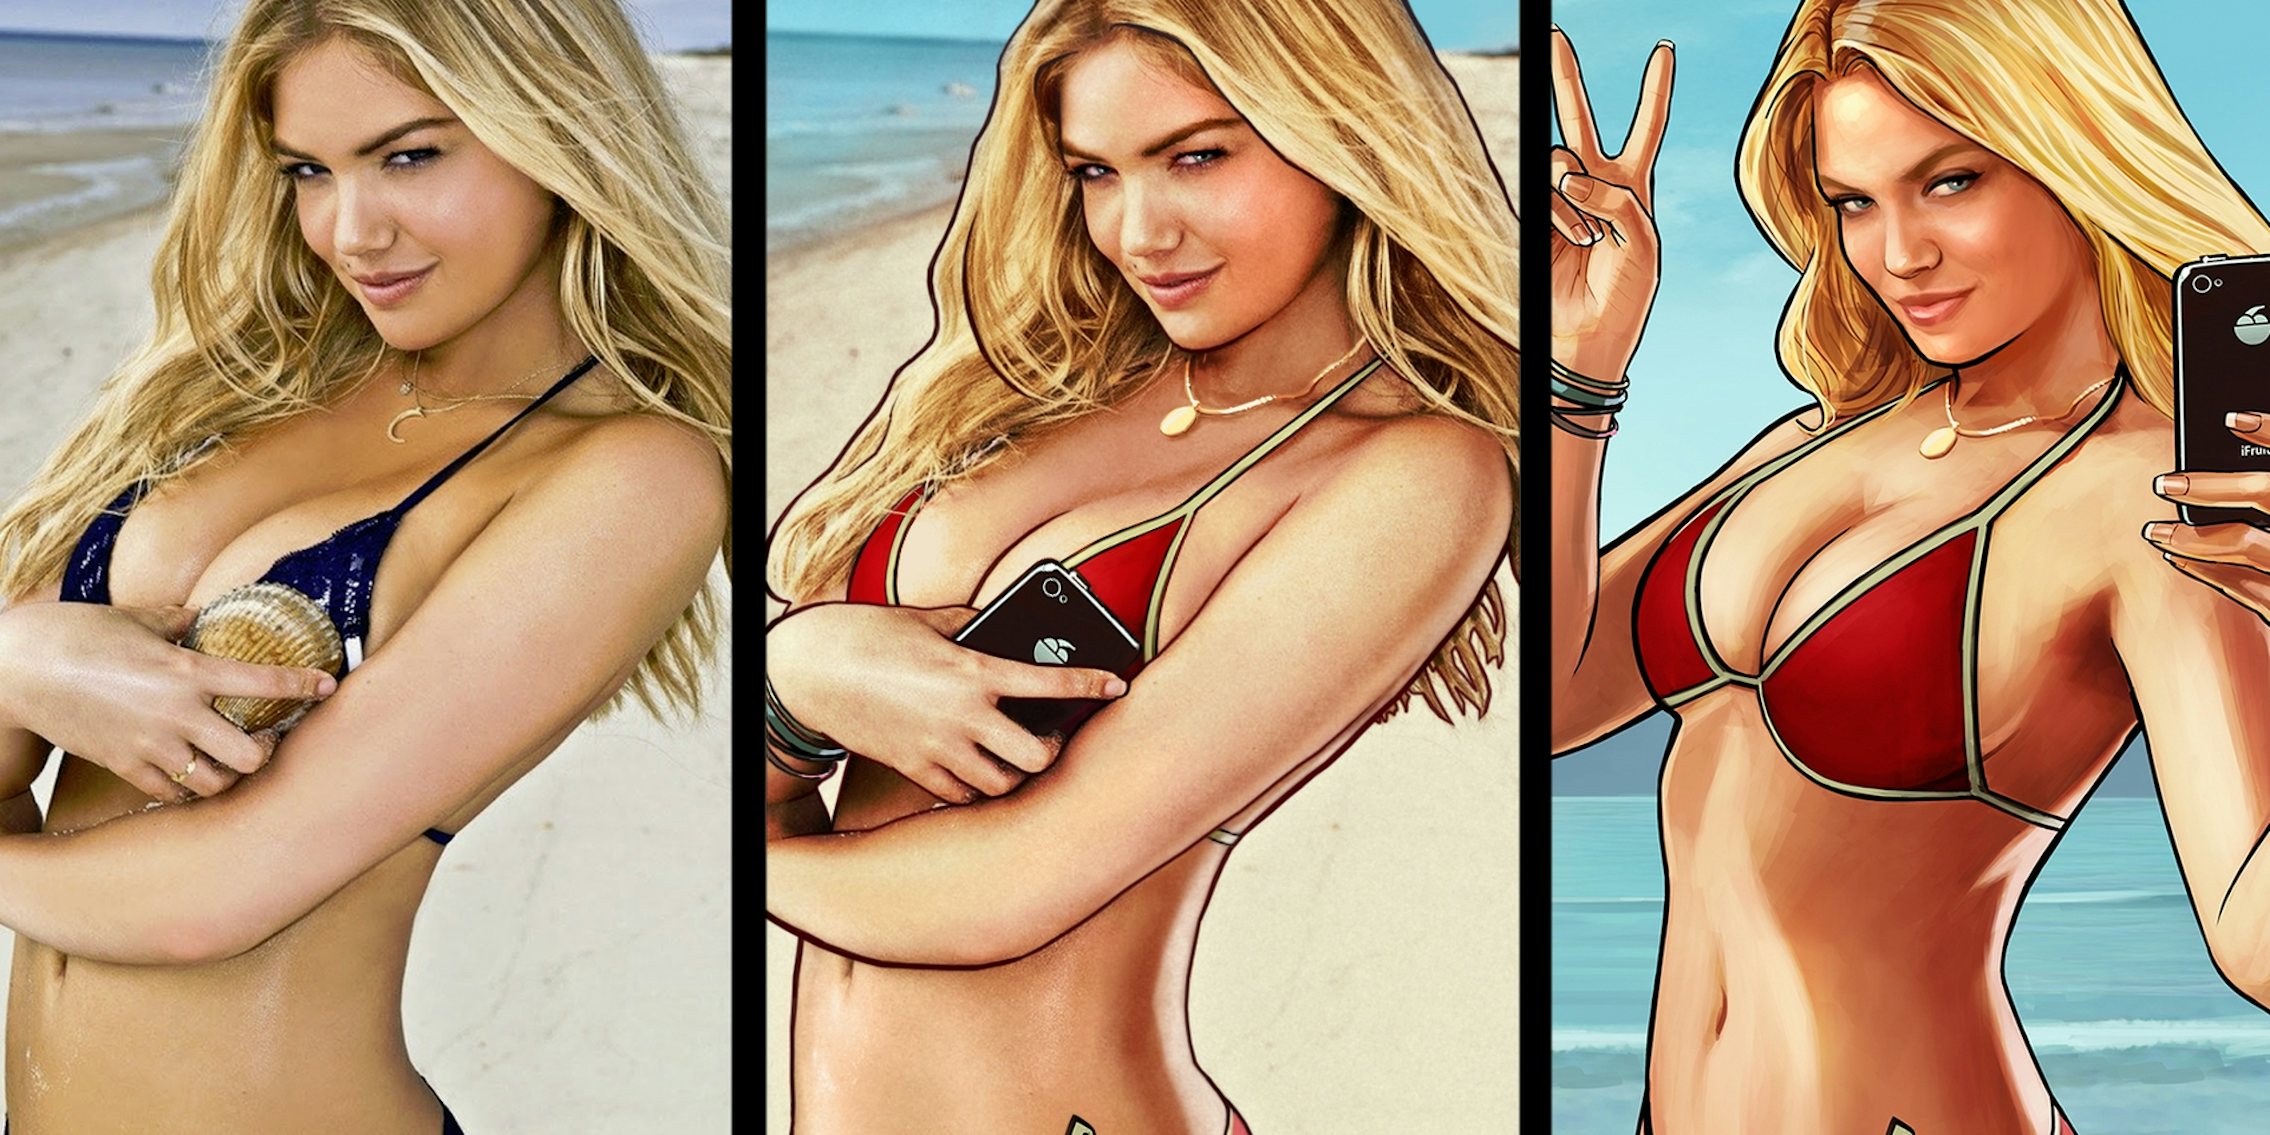 Sexy Nude Beach Girls - That's not Kate Upton in the 'Grand Theft Auto V' adsâ€”it's this model